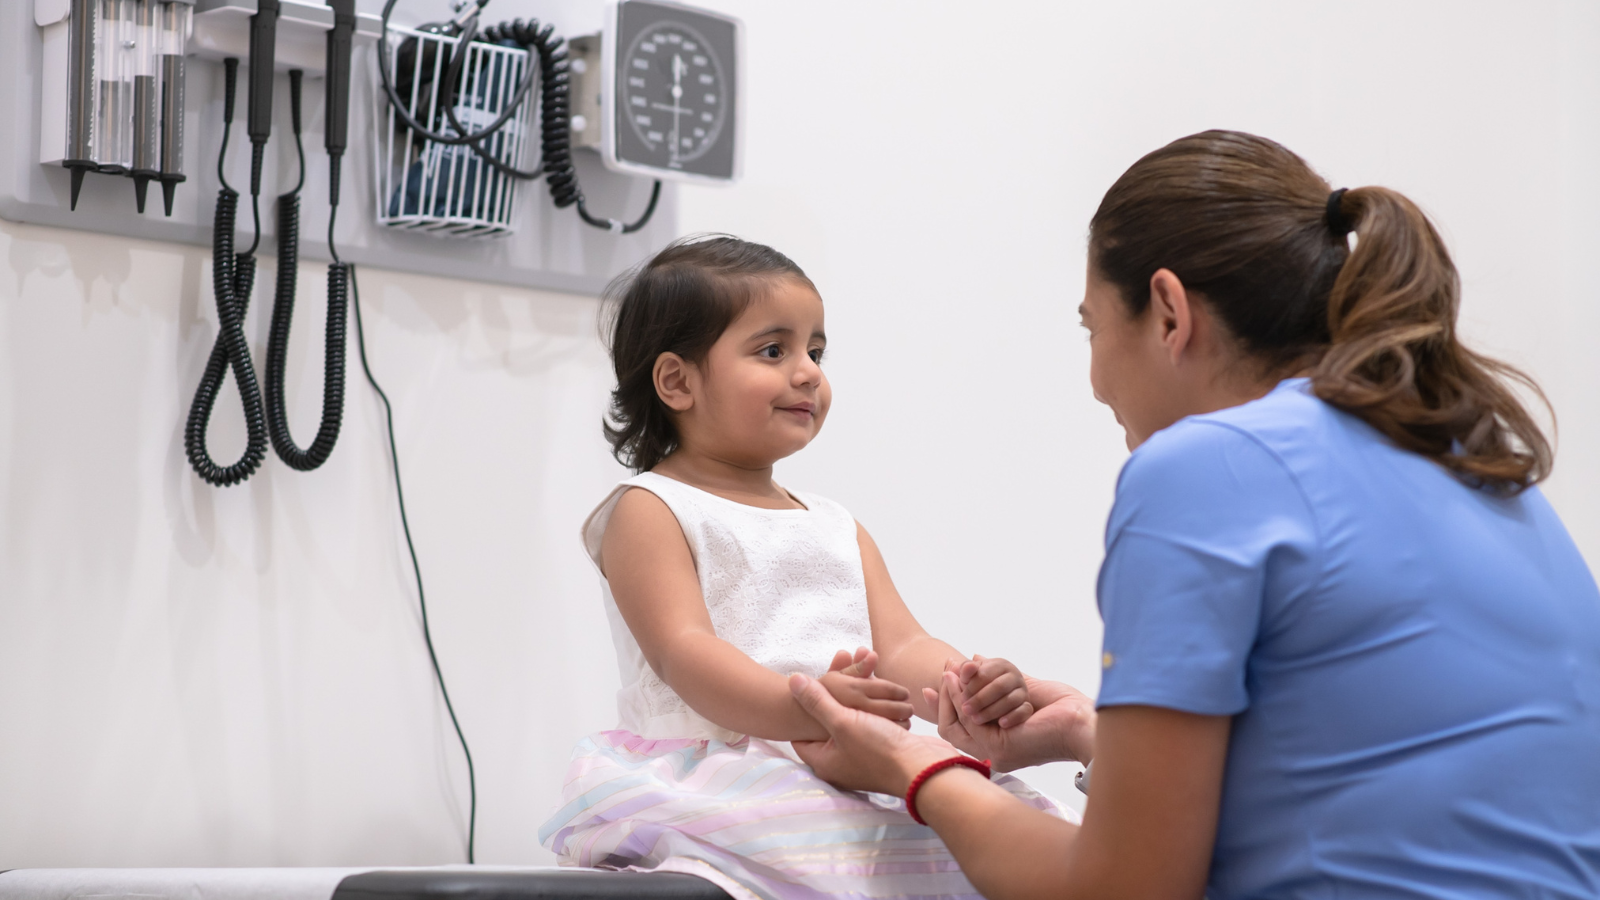 Doctor speaking with a child in a medical consultation room